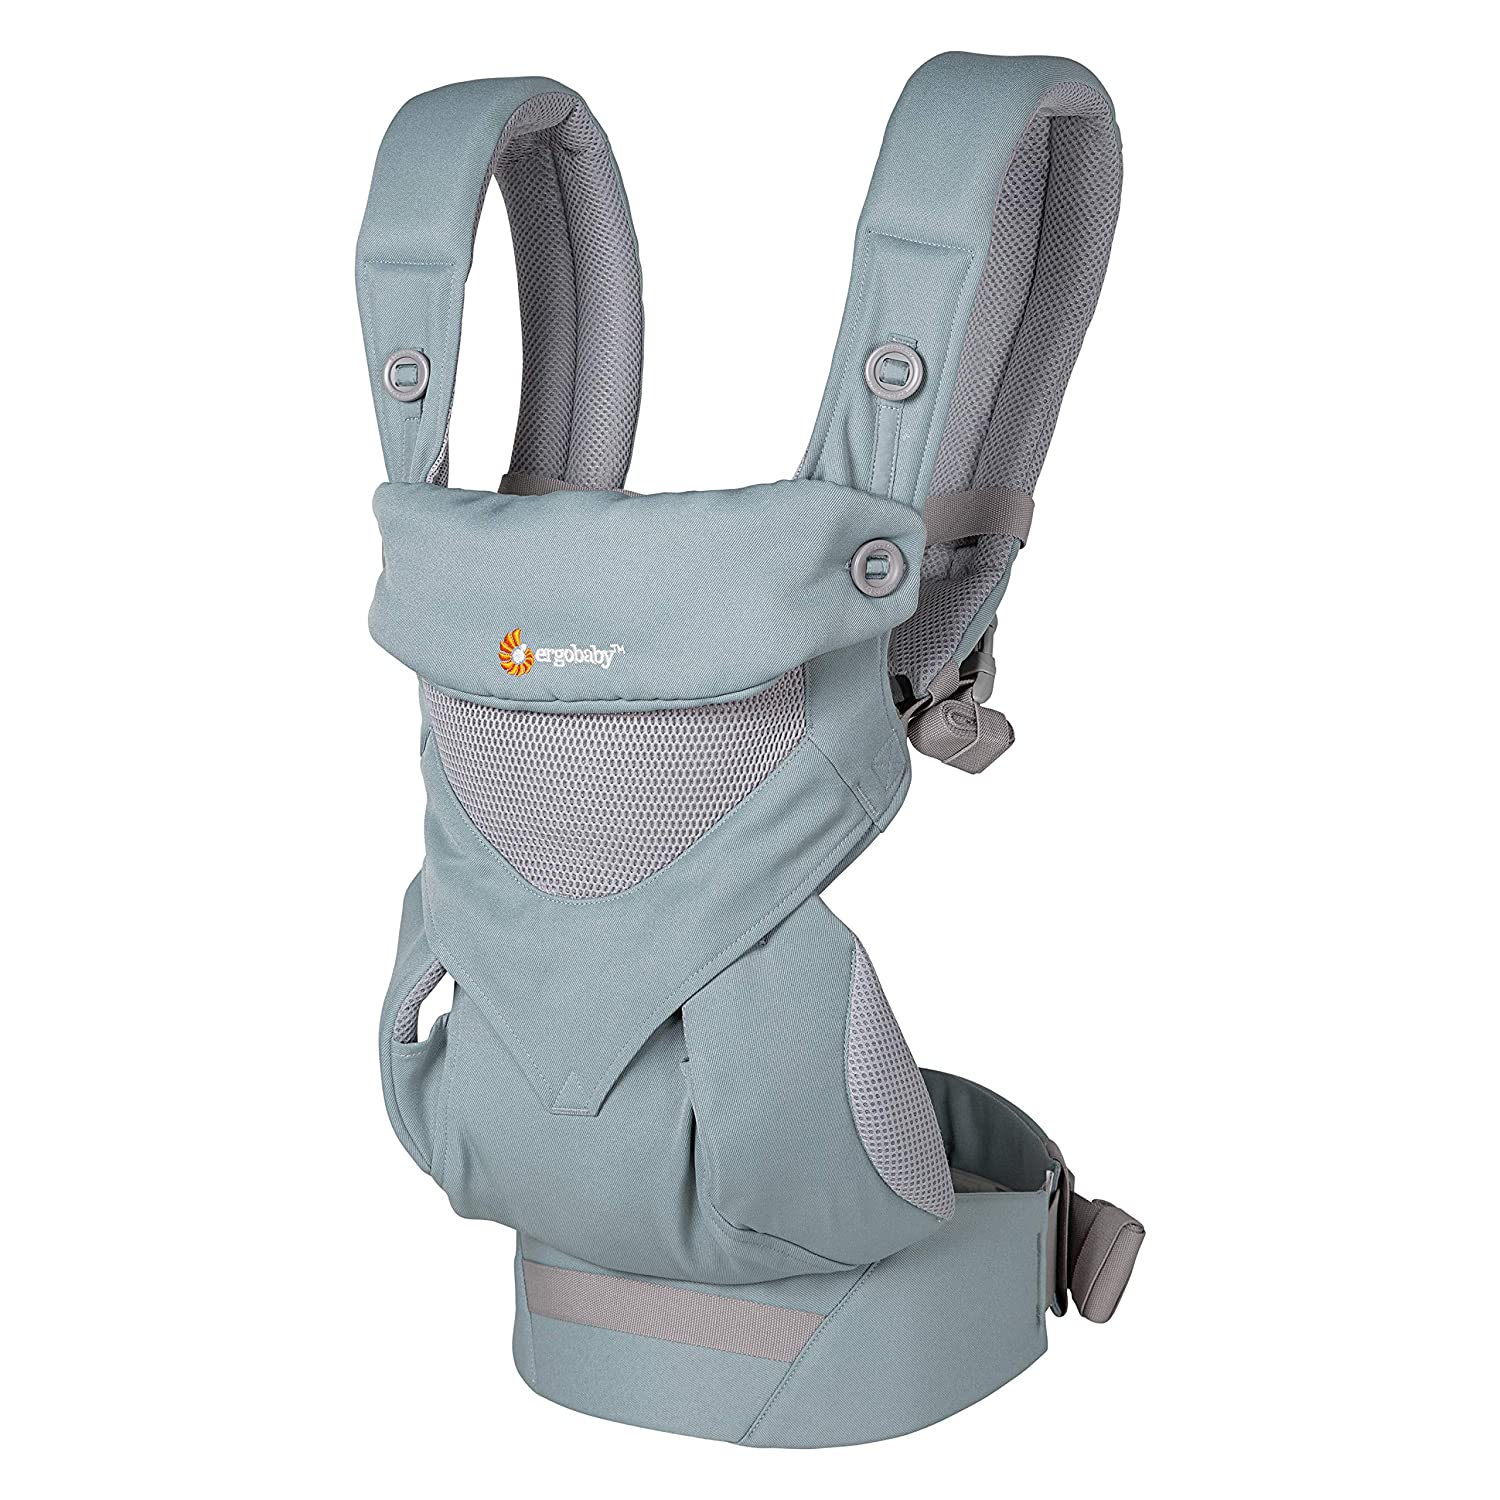 Ergobaby Baby Carrier 360 Cool Air Mesh Carbon Gray, Ergonomic 4in1 Carrying Bag Baby Carrying System Child carrier up to 20 kg